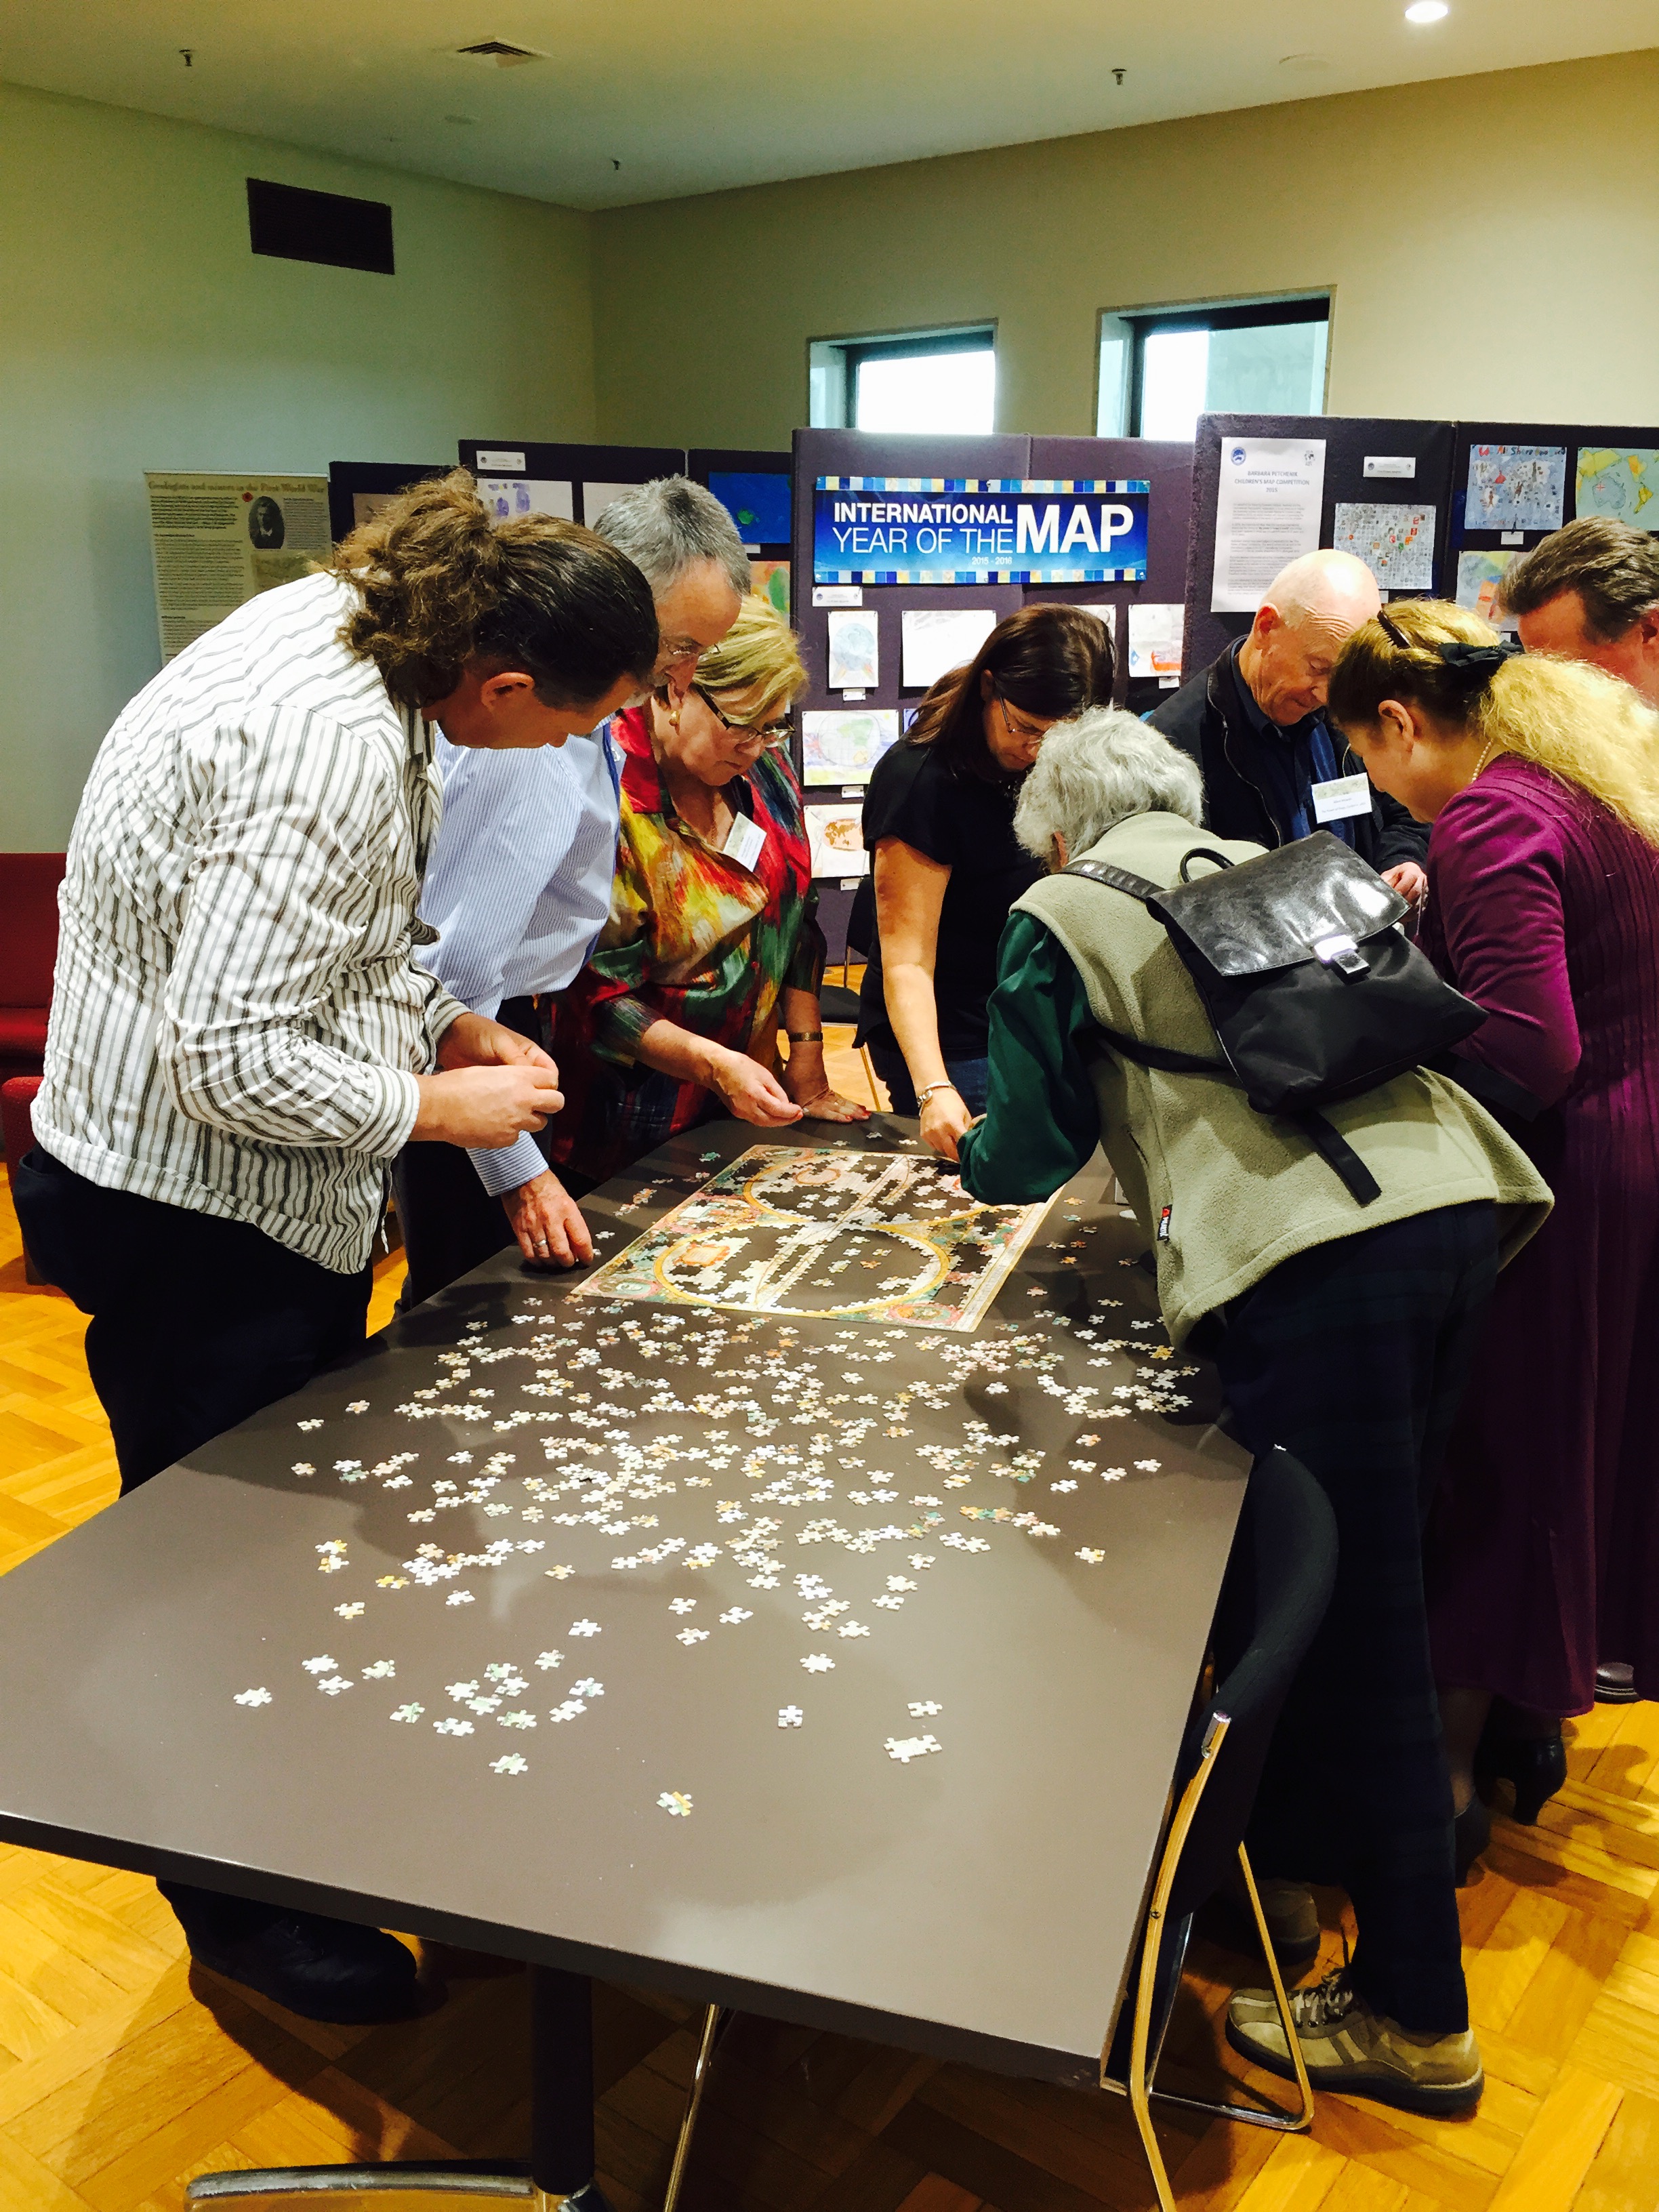 Attendees enjoying the challenge of a good jigsaw puzzle